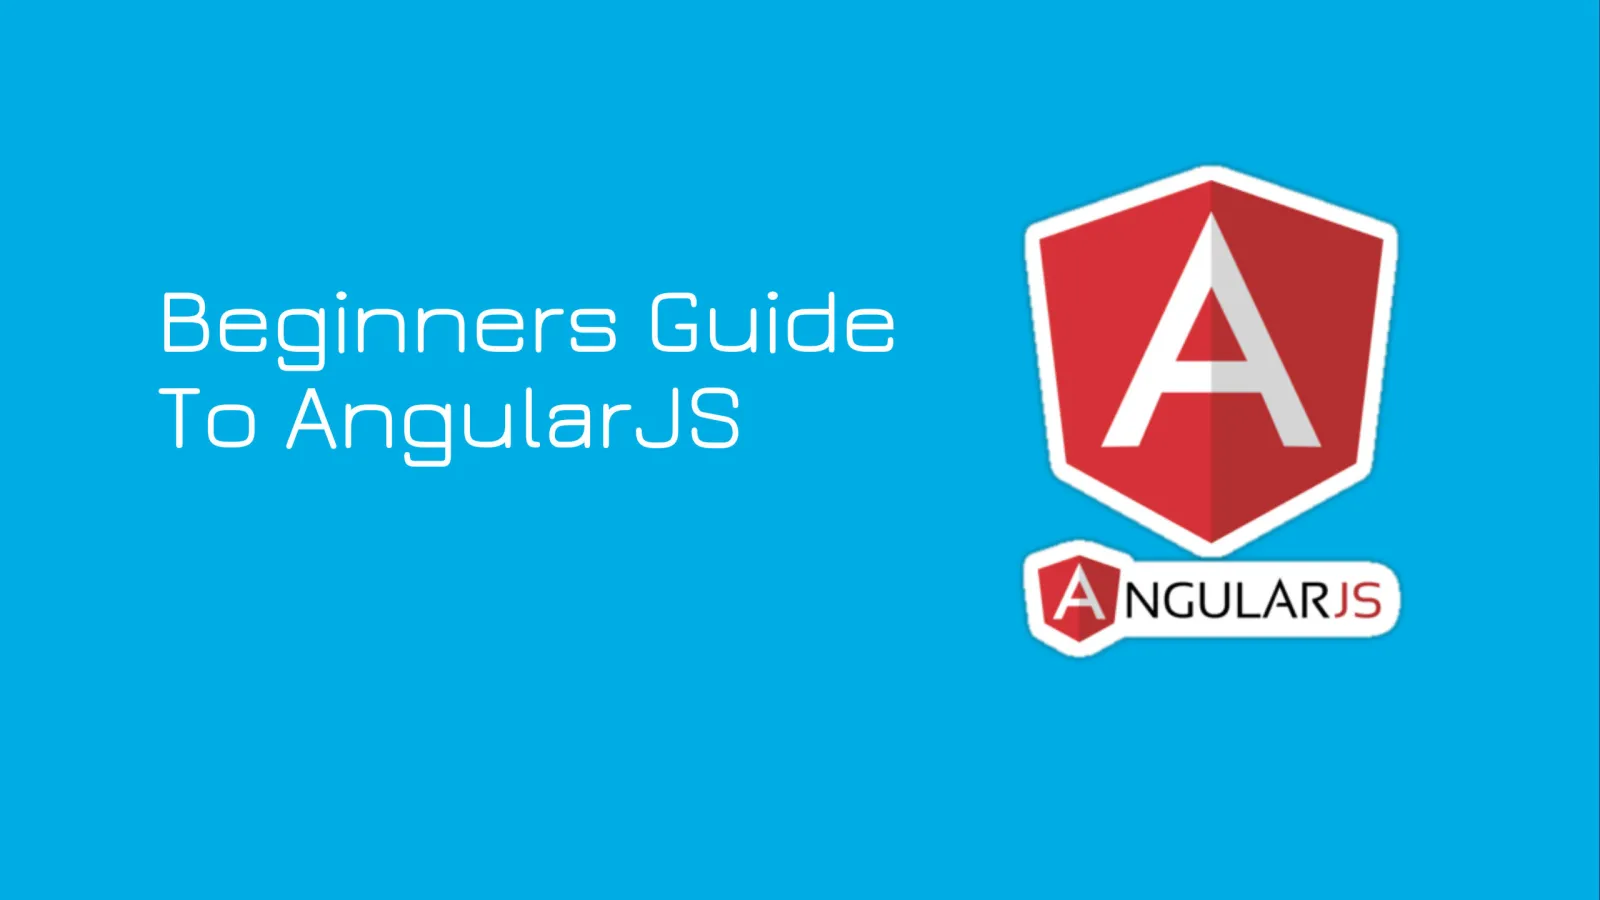 My first impression of learning AngularJS